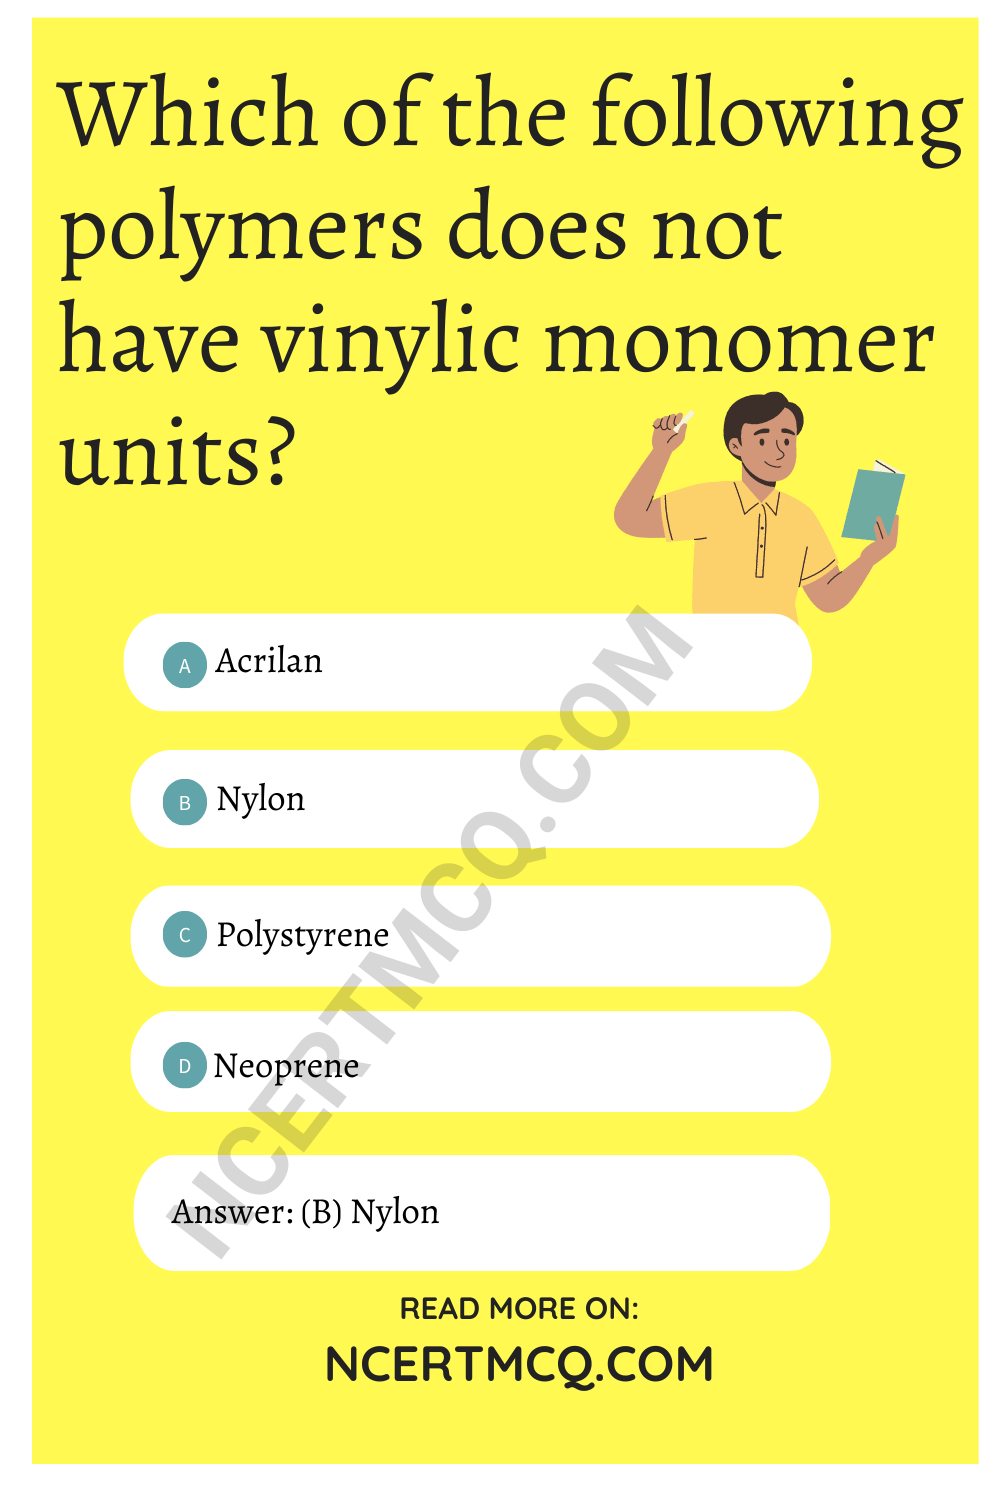 Which of the following polymers does not have vinylic monomer units?